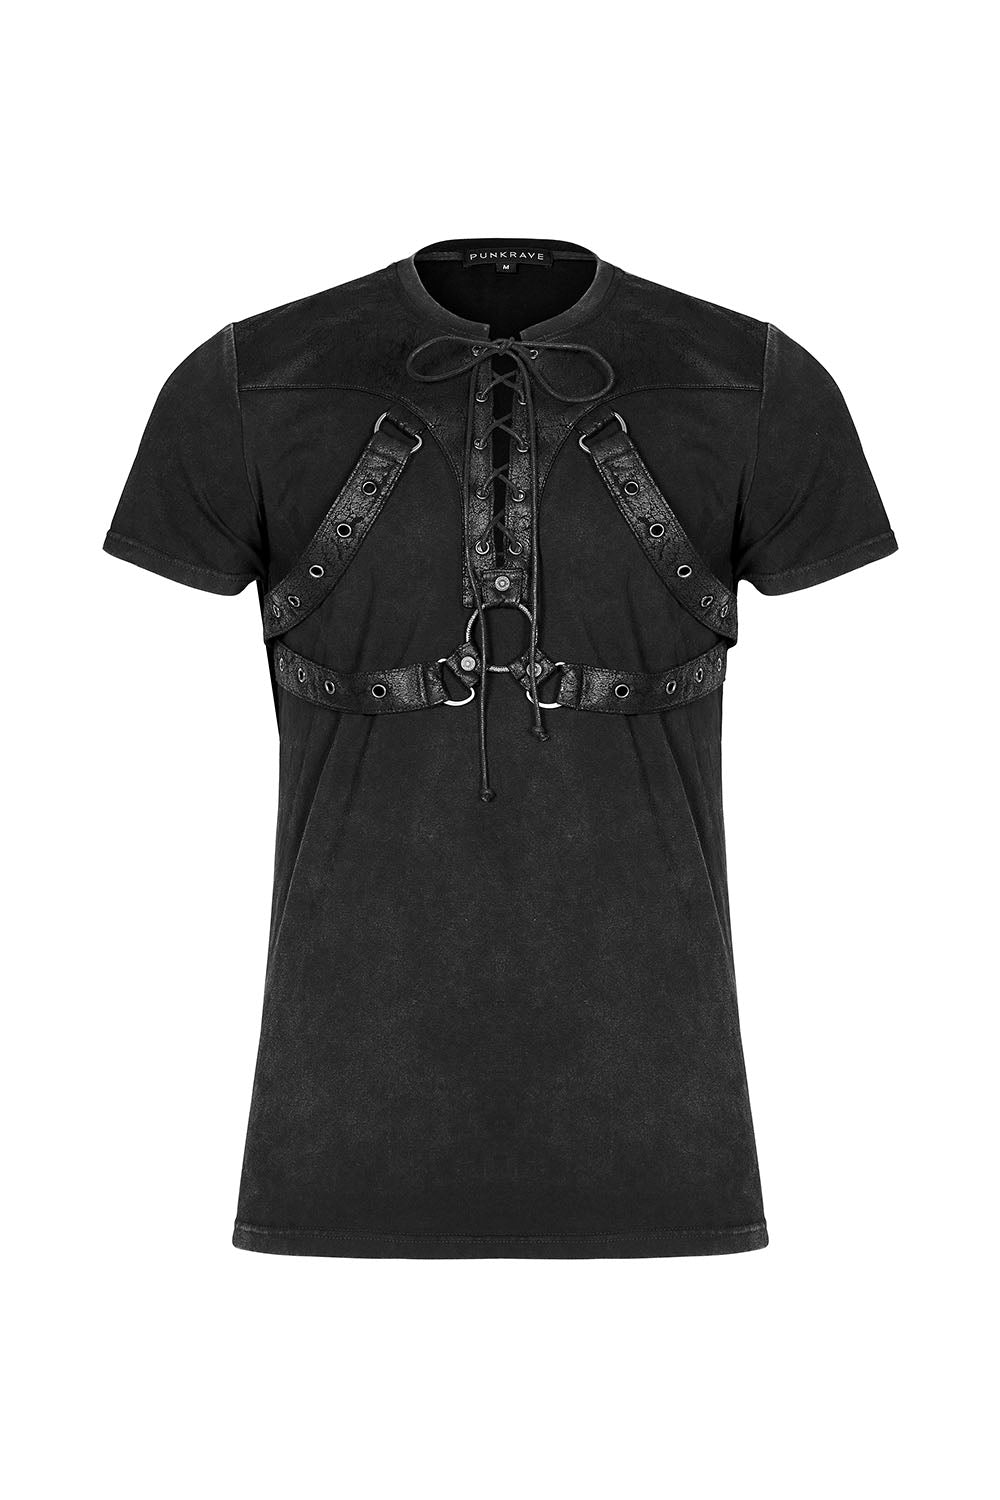 Feudal Lord Harness Top